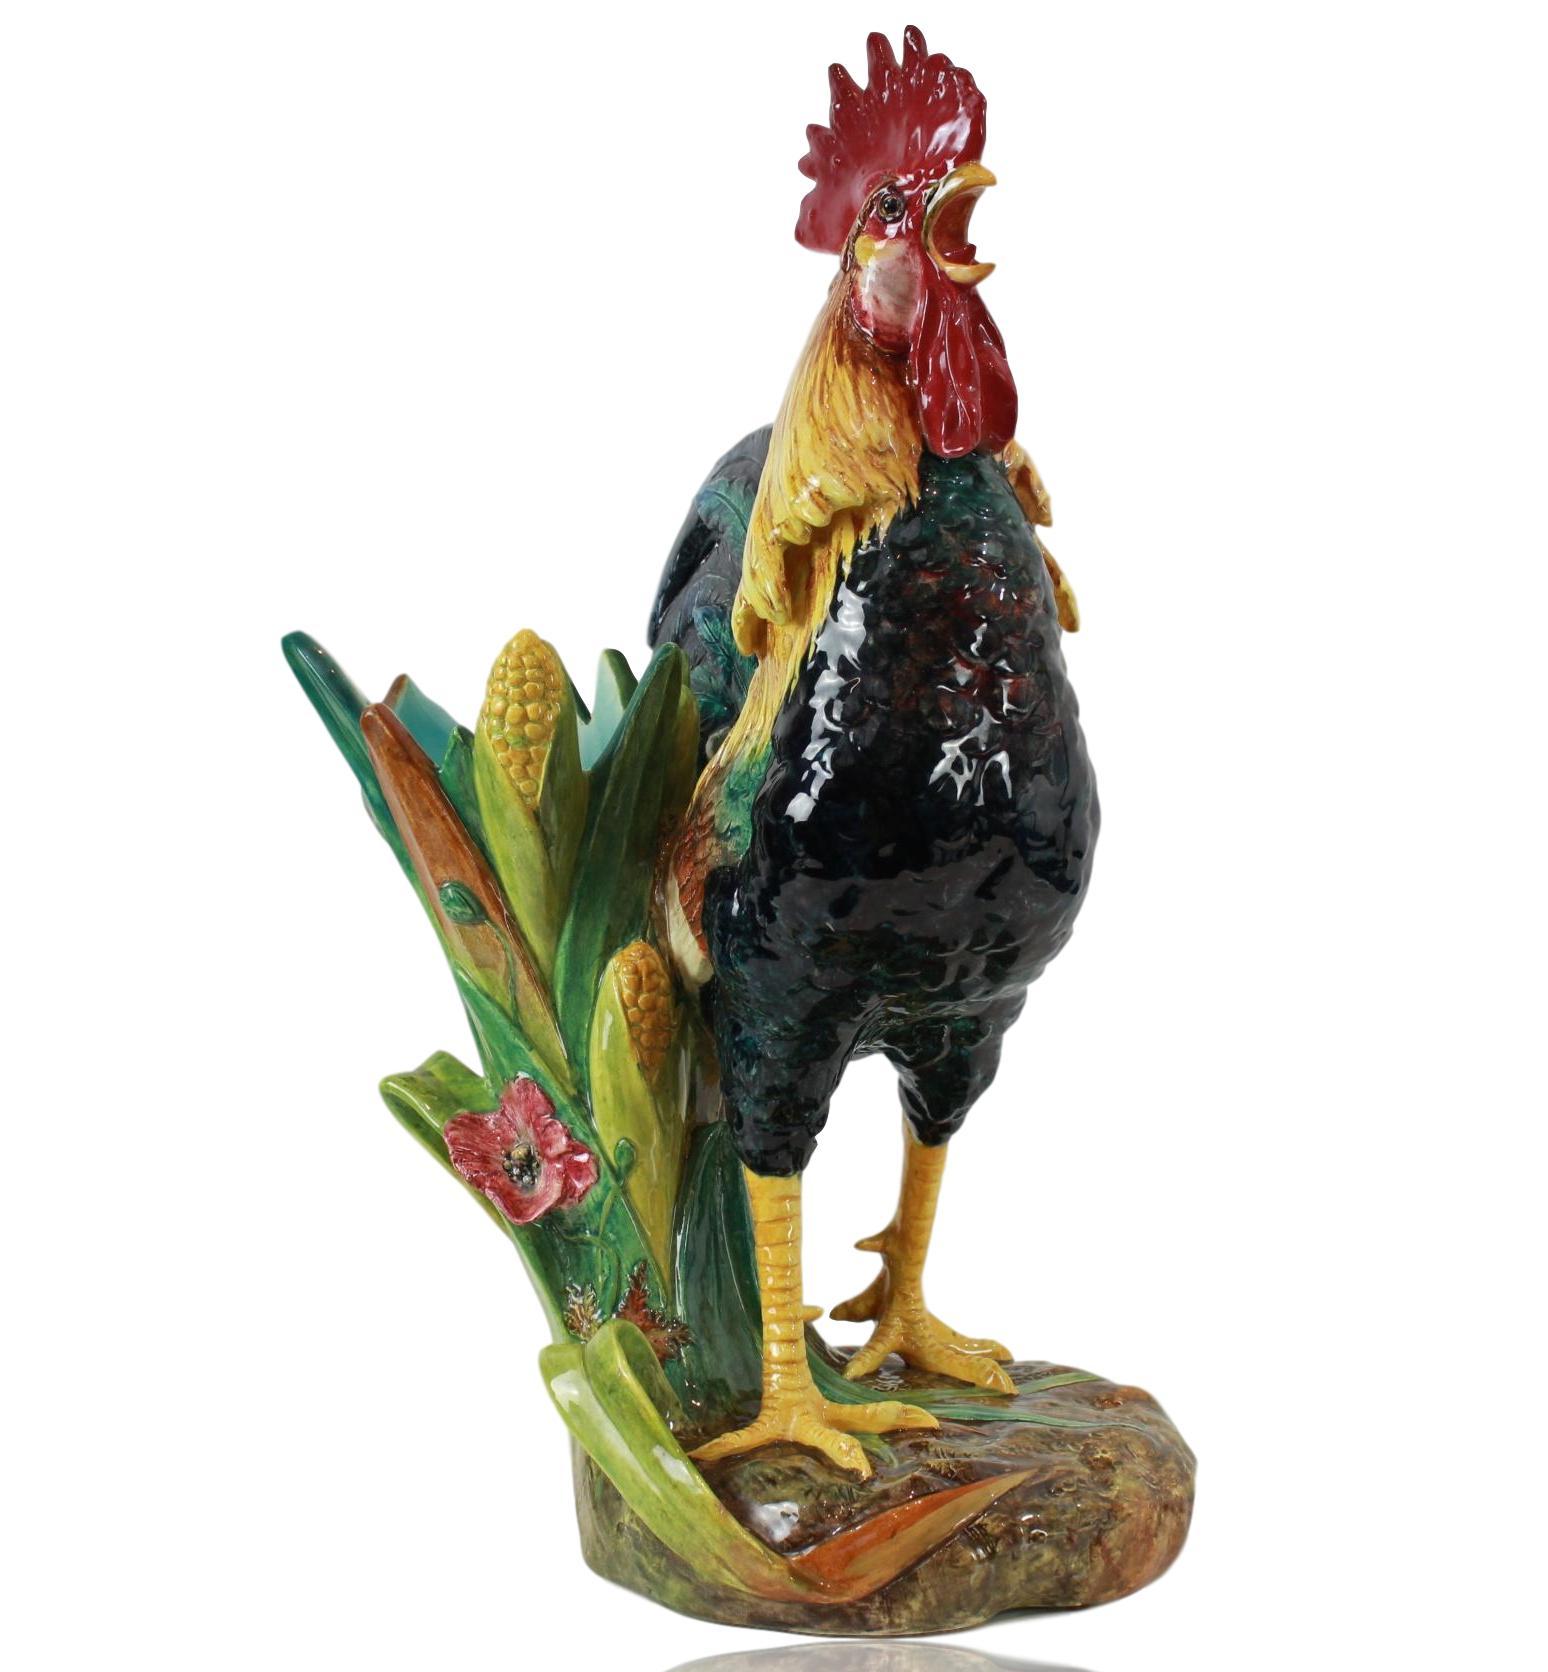 Very Large French Majolica (Barbotine) Rooster Vase by Delphin Massier, circa 1880, 24ins-High, modeled as a life-size crowing rooster (tongue intact--often missing or restored), naturalistically and vibrantly glazed in brown, blue, black, yellow,